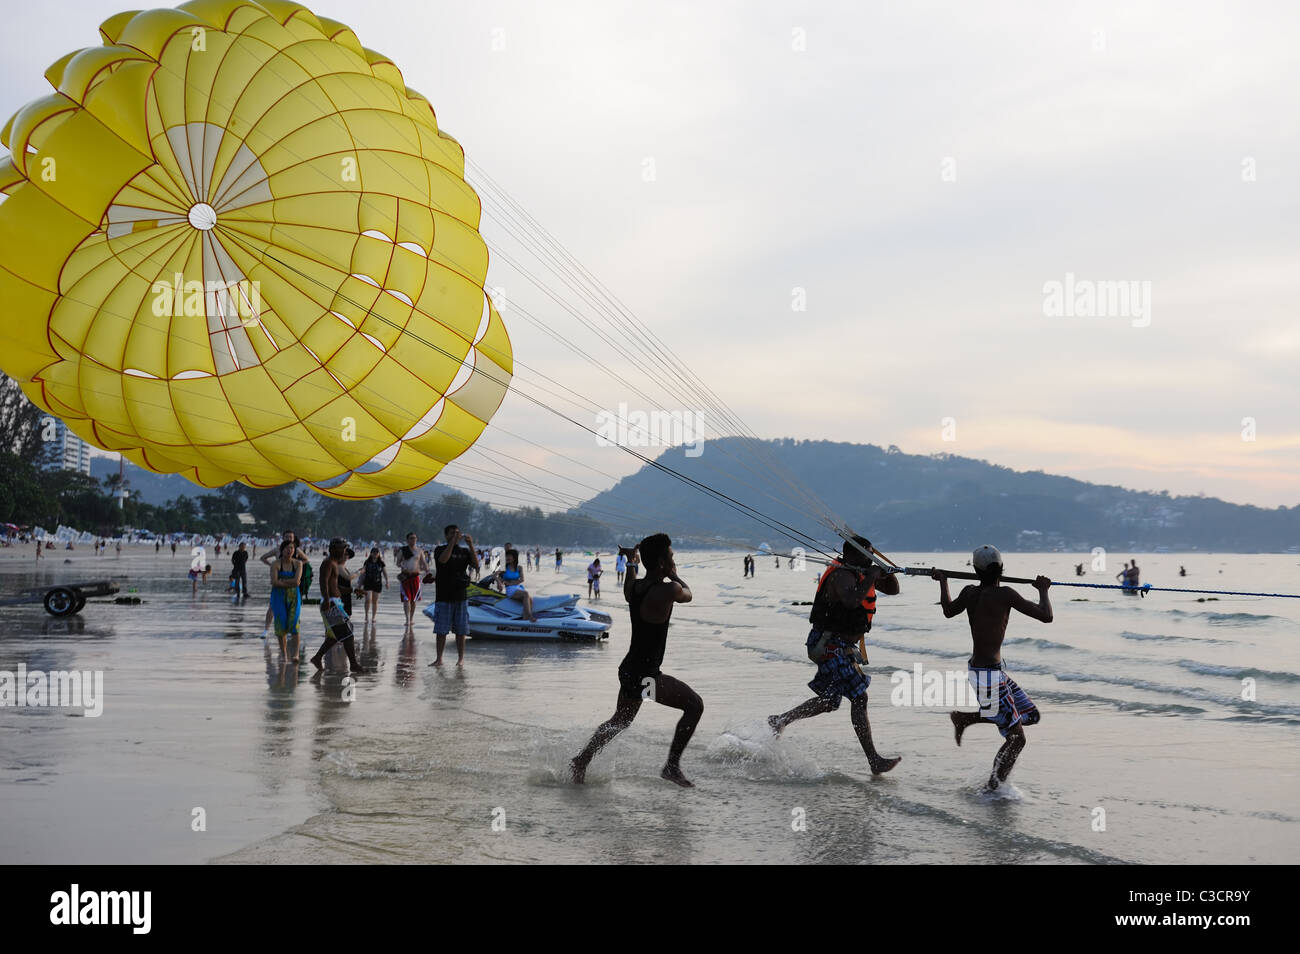 Unidentified man (in the middle) parasails at sunset on FEB 6,2011 at Patong Beach, Phuket, Thailand Stock Photo